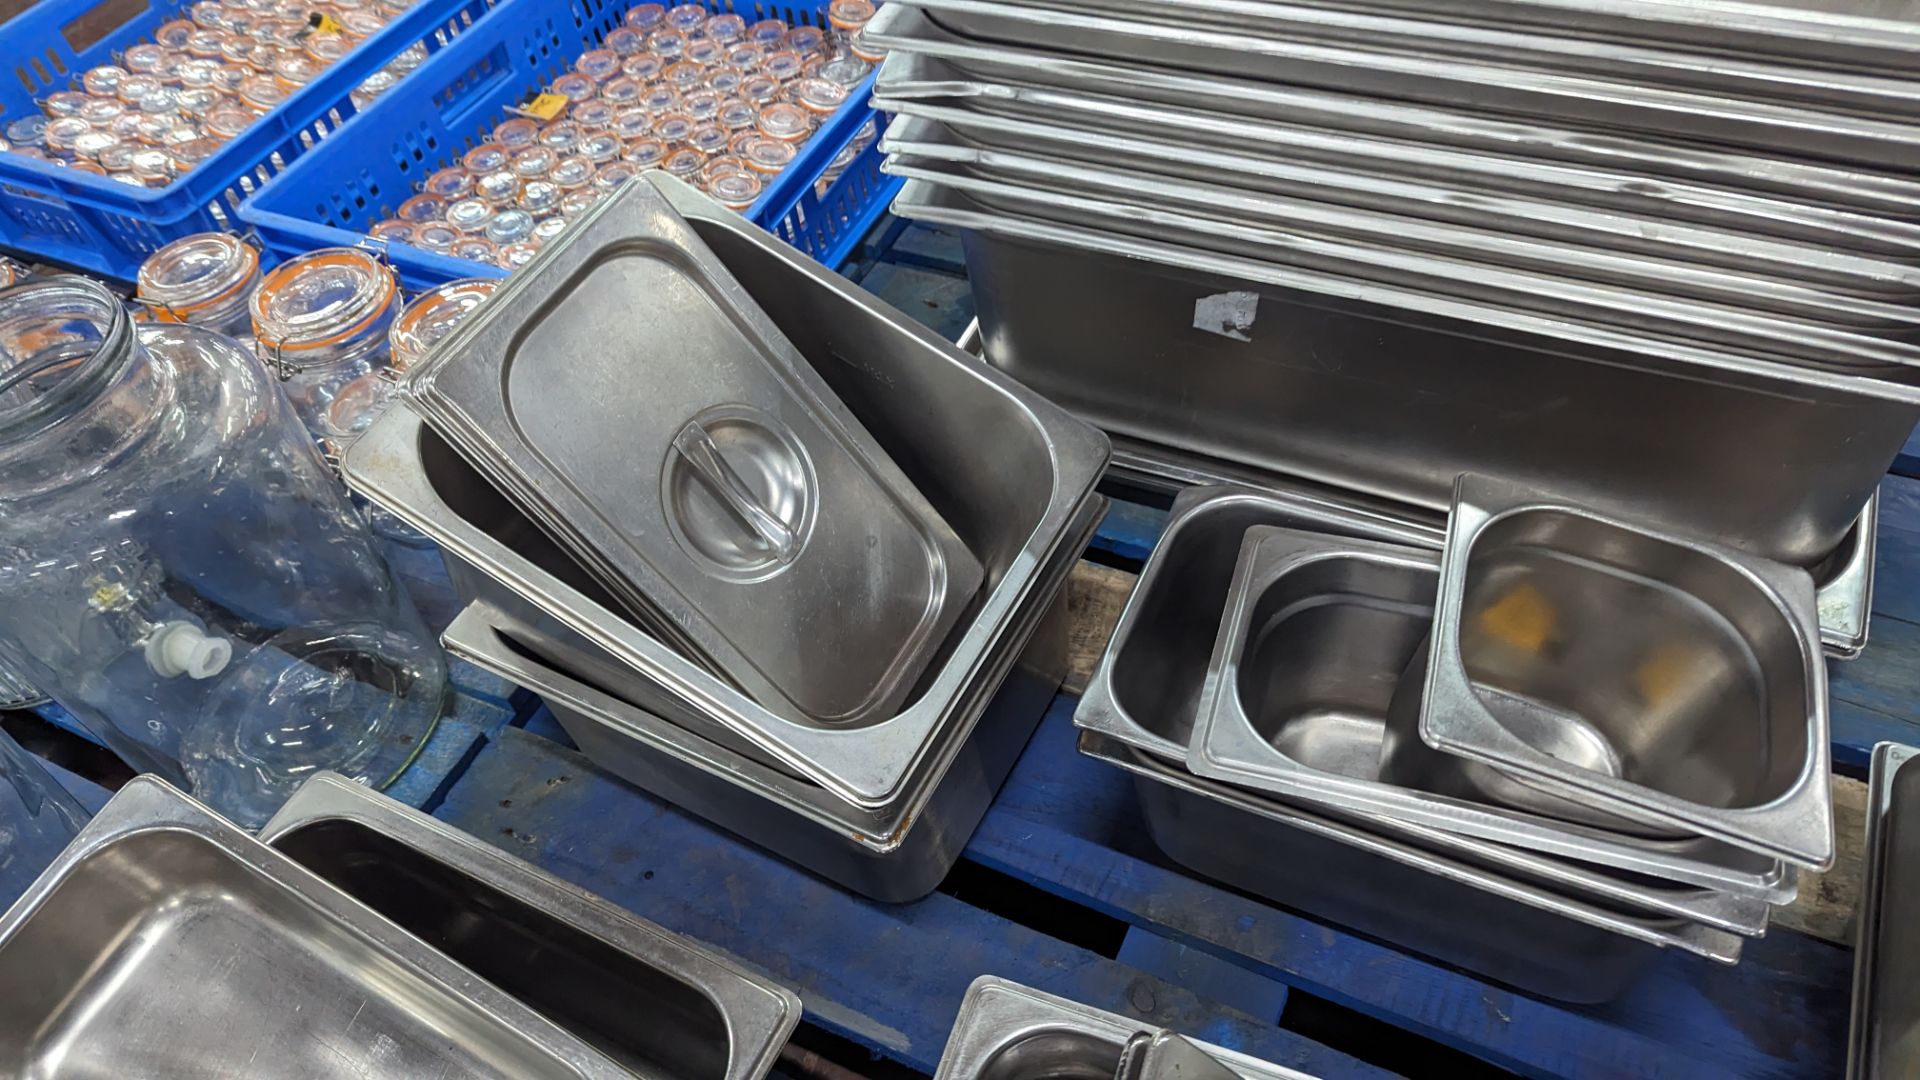 The contents of a pallet of assorted stainless steel trays, dishes, lids & more - approximately 43 i - Image 5 of 10